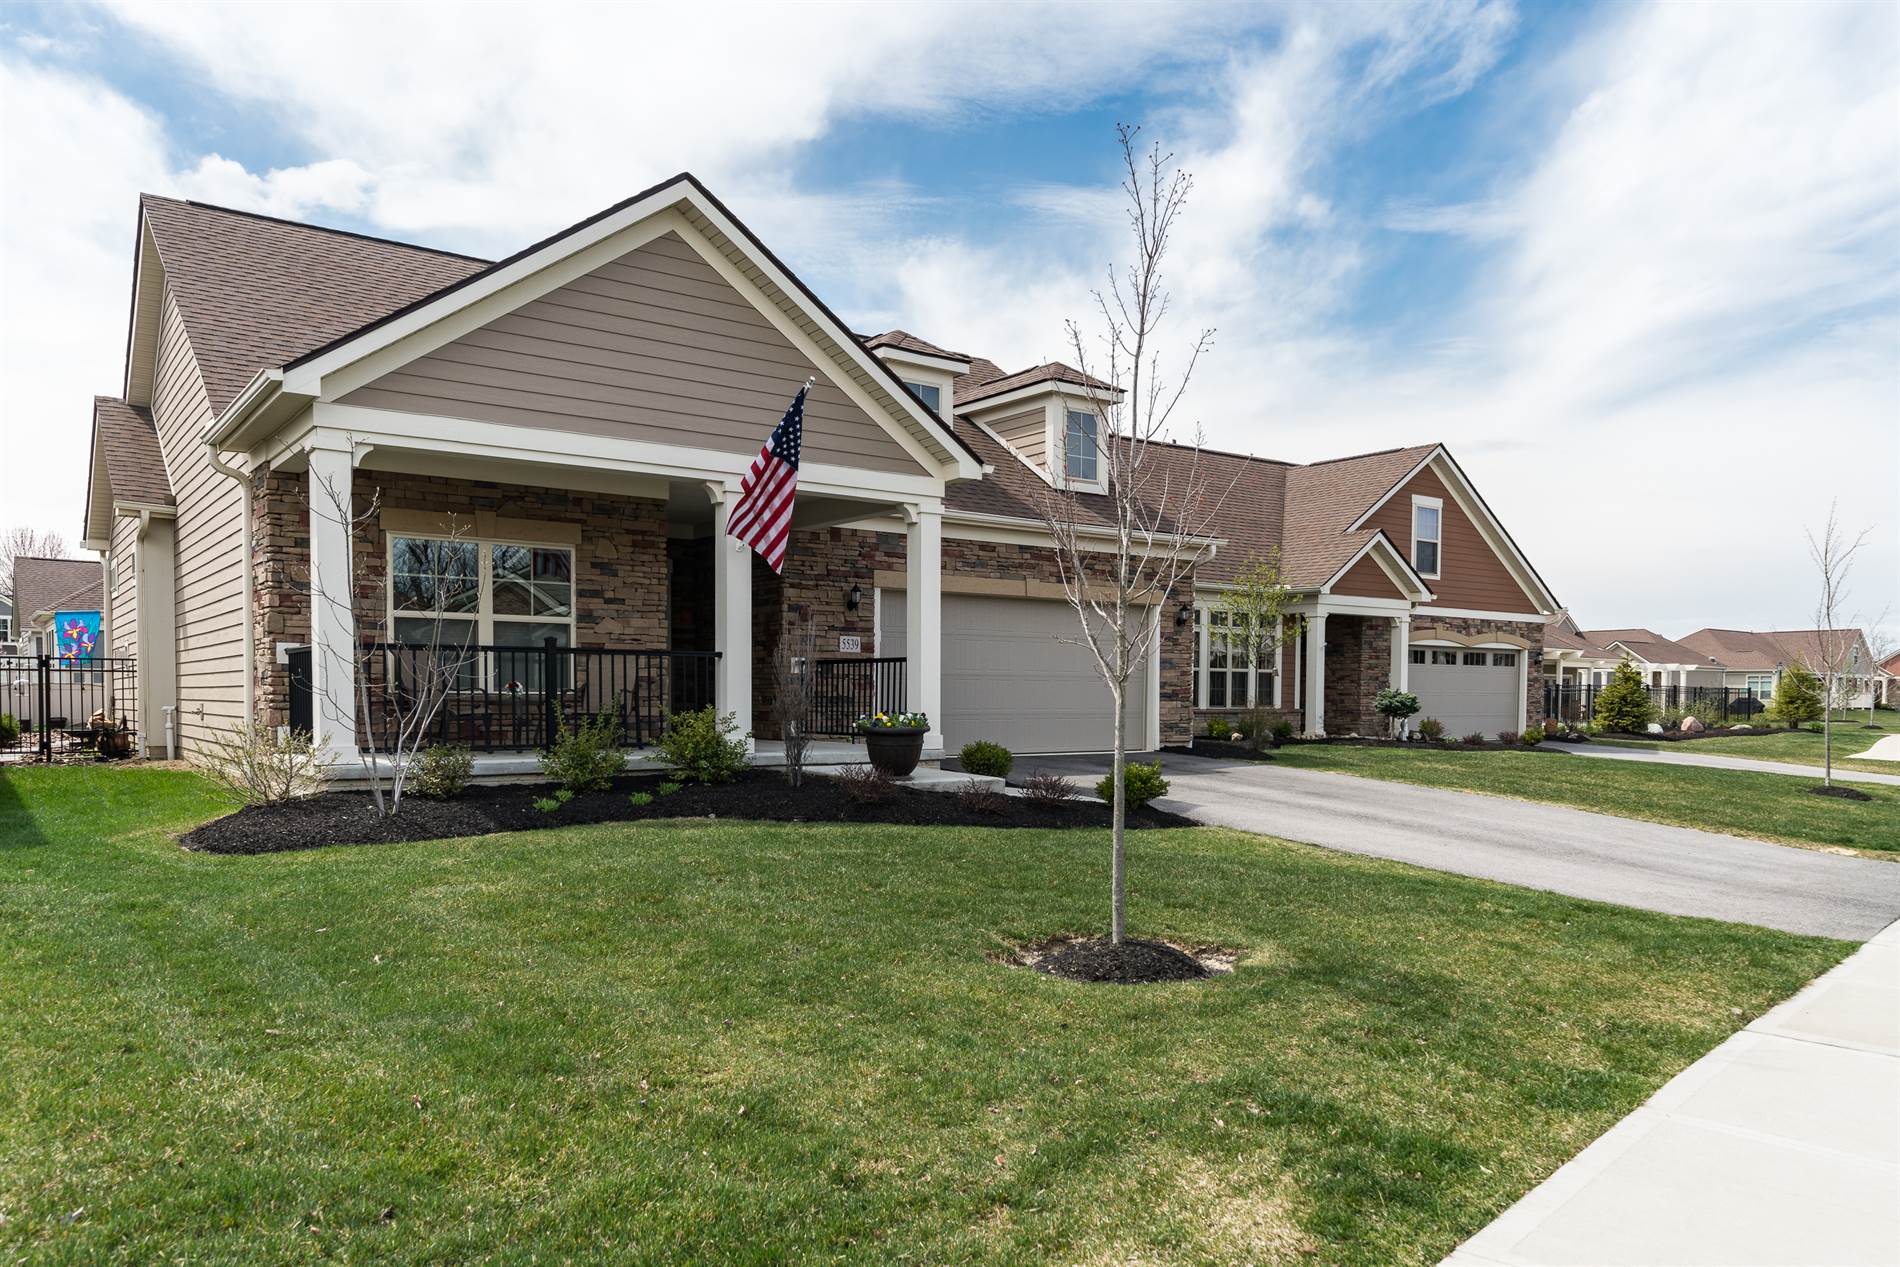 5539 Eventing Way, Hilliard, OH 43026